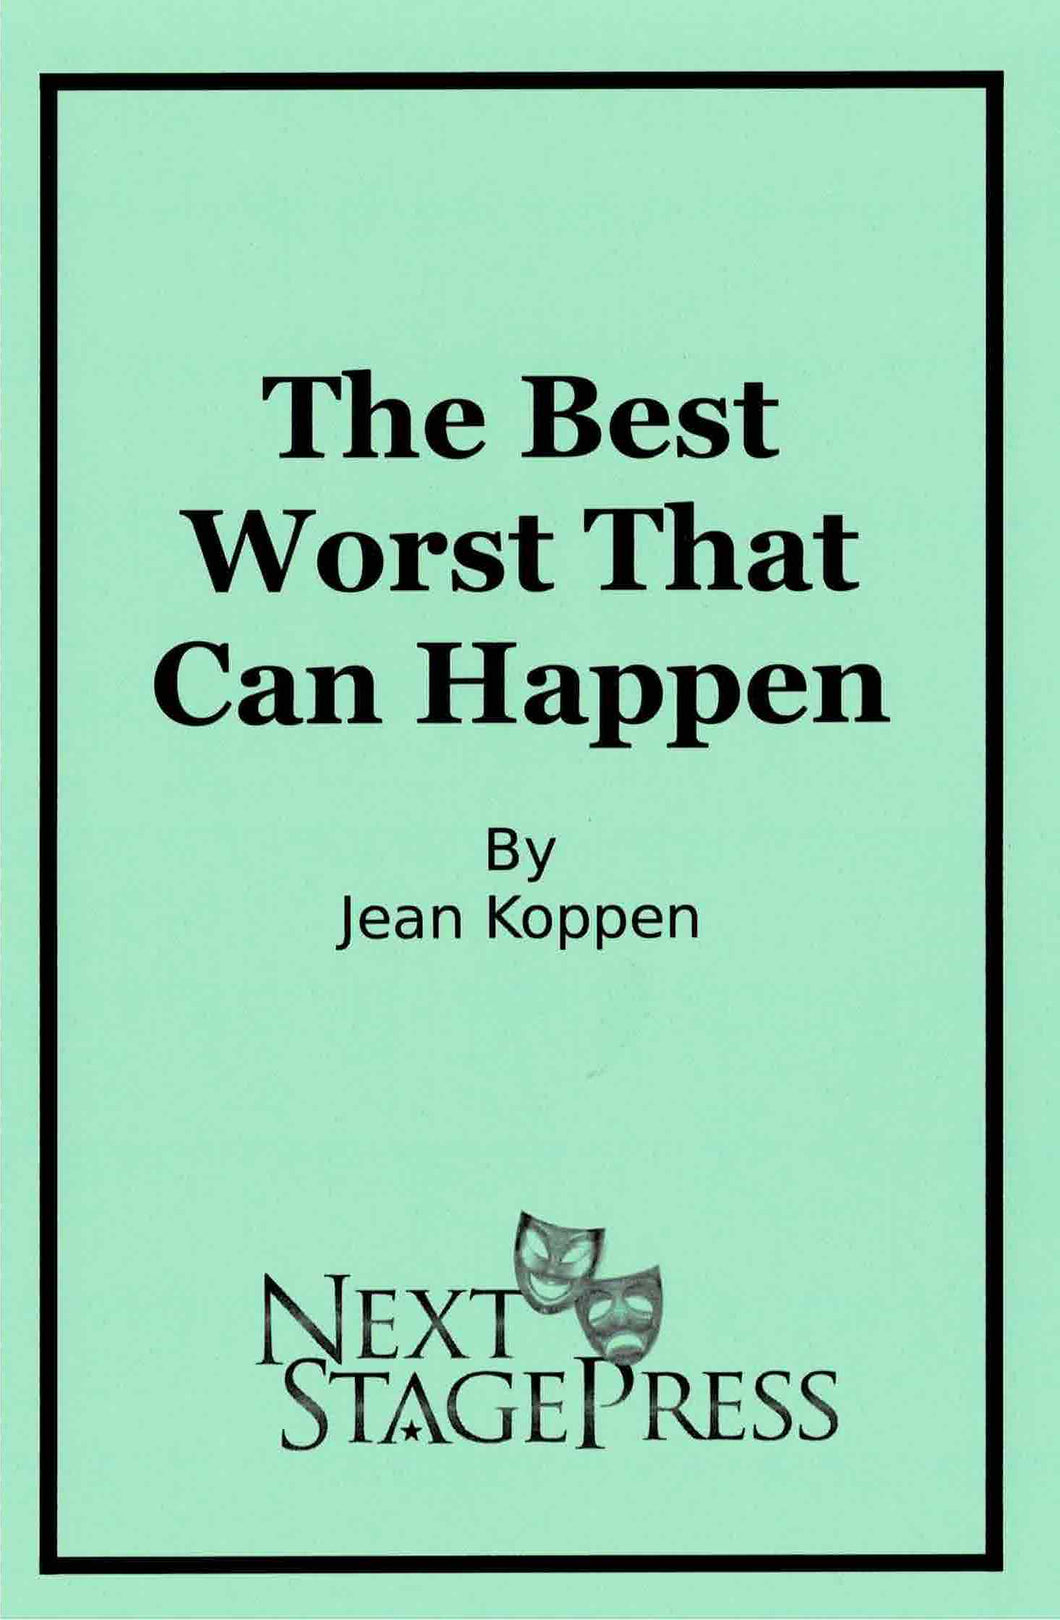 The Best Worst That Can Happen - Digital Version